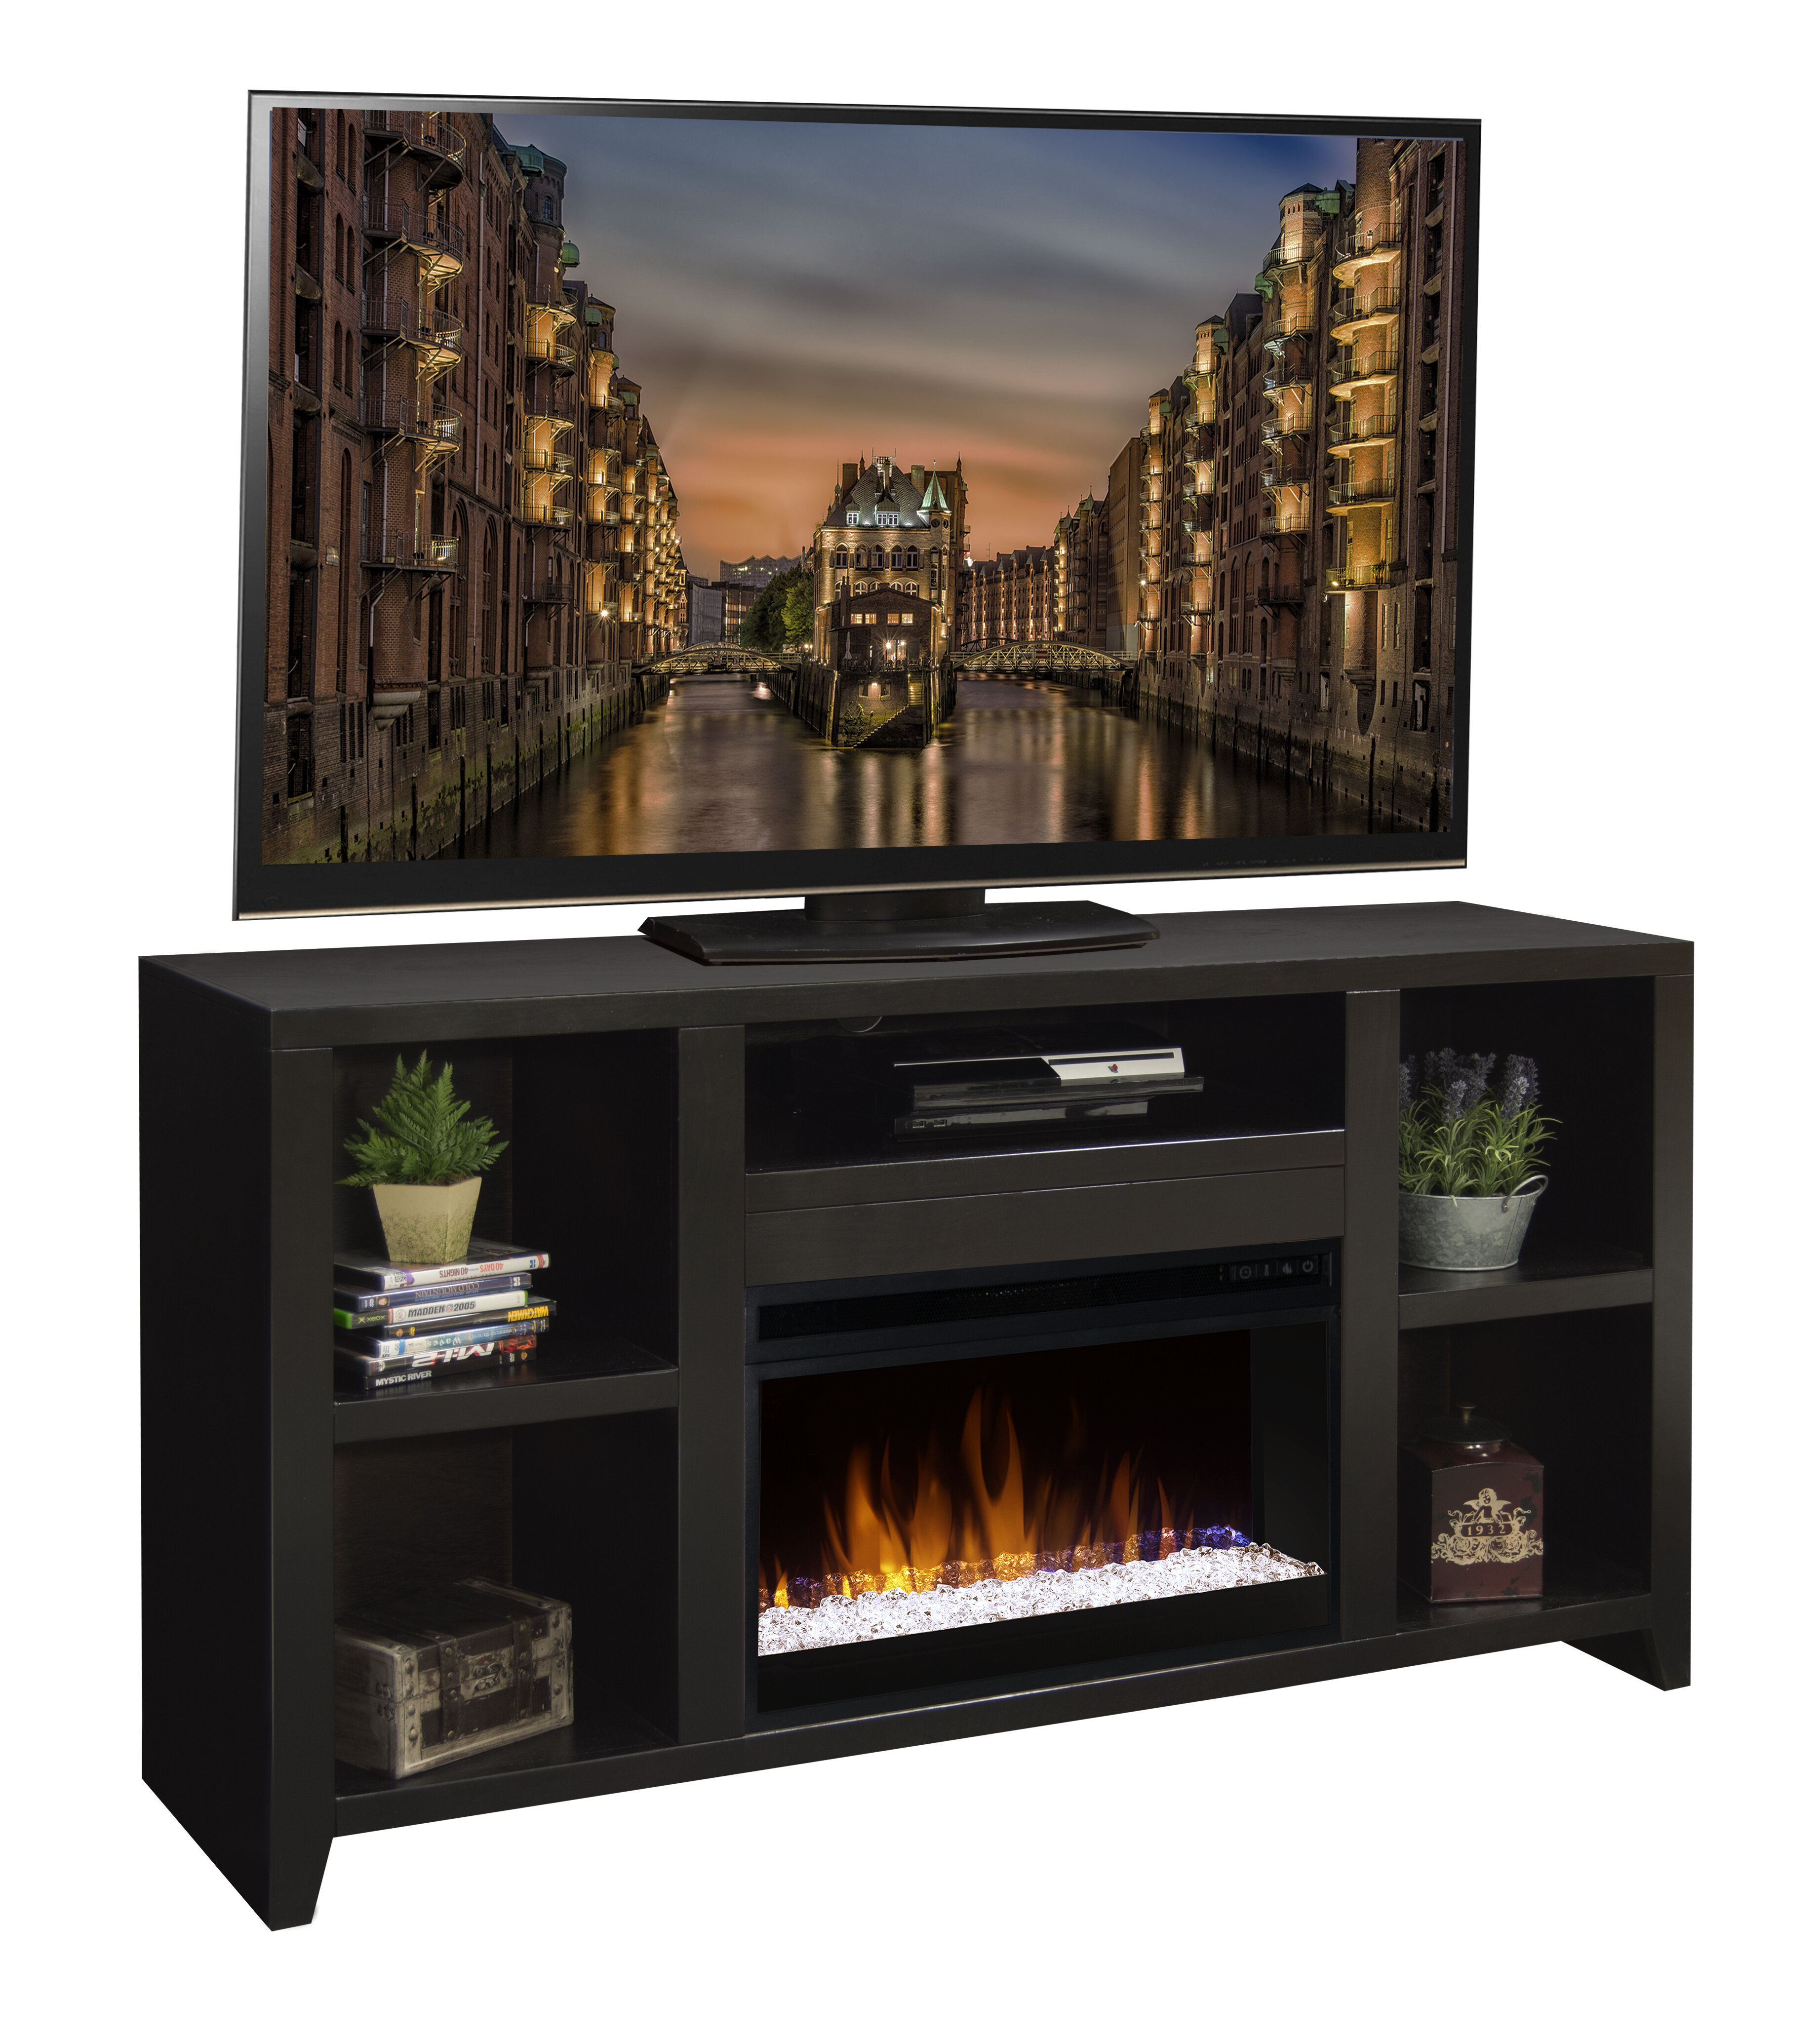 Barnwood Fireplace Surround Lovely Garretson Tv Stand for Tvs Up to 65" with Fireplace